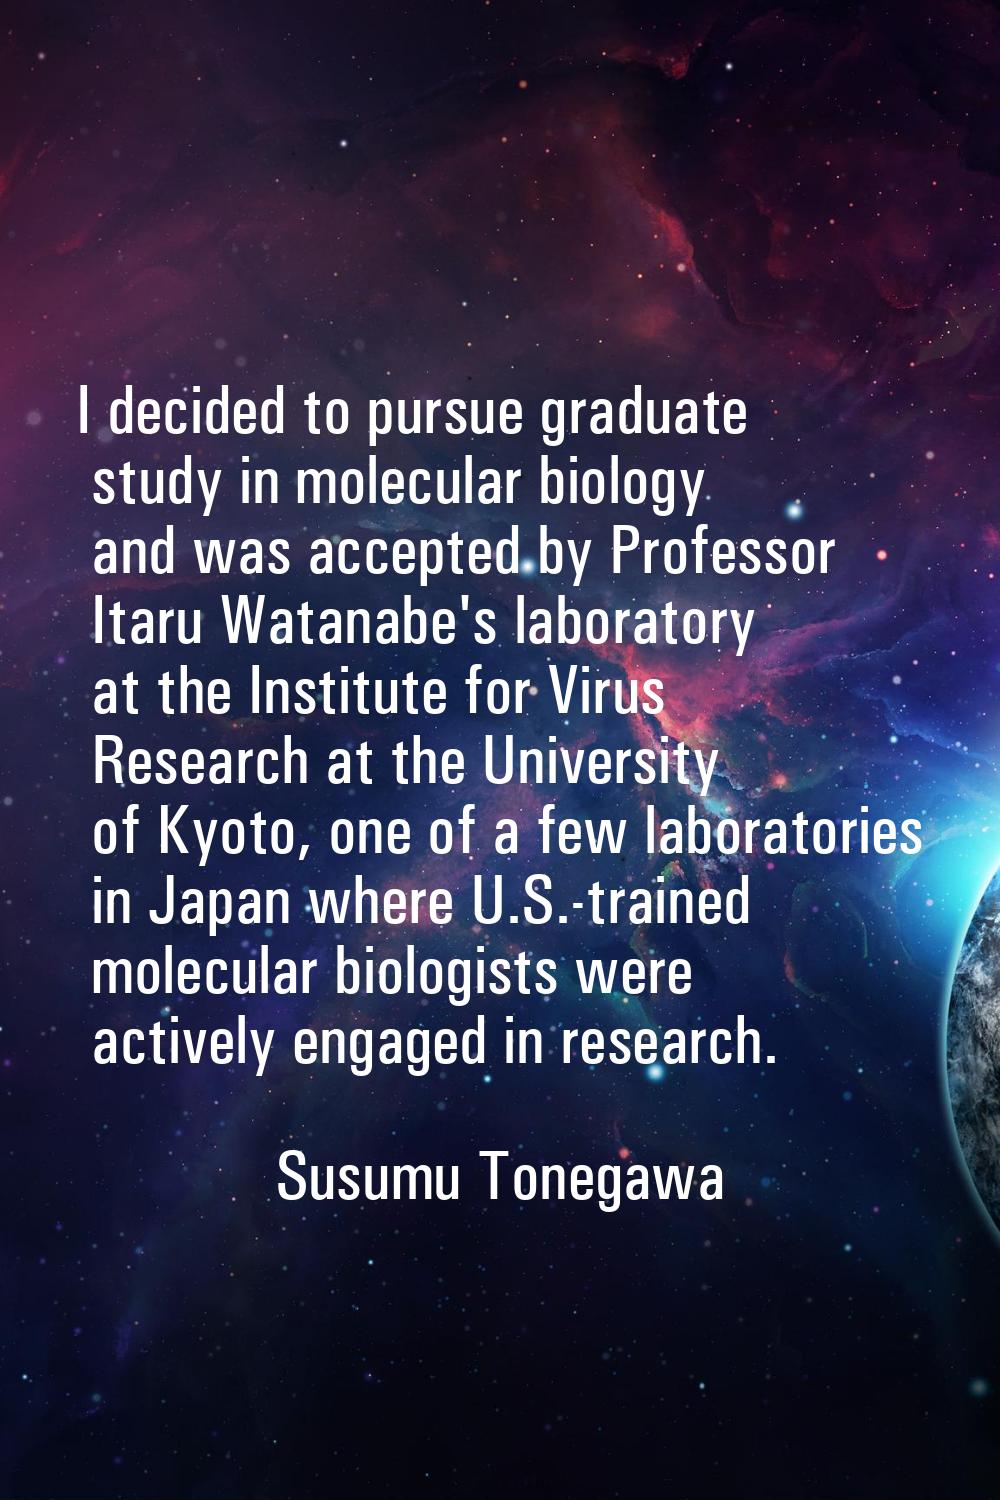 I decided to pursue graduate study in molecular biology and was accepted by Professor Itaru Watanab